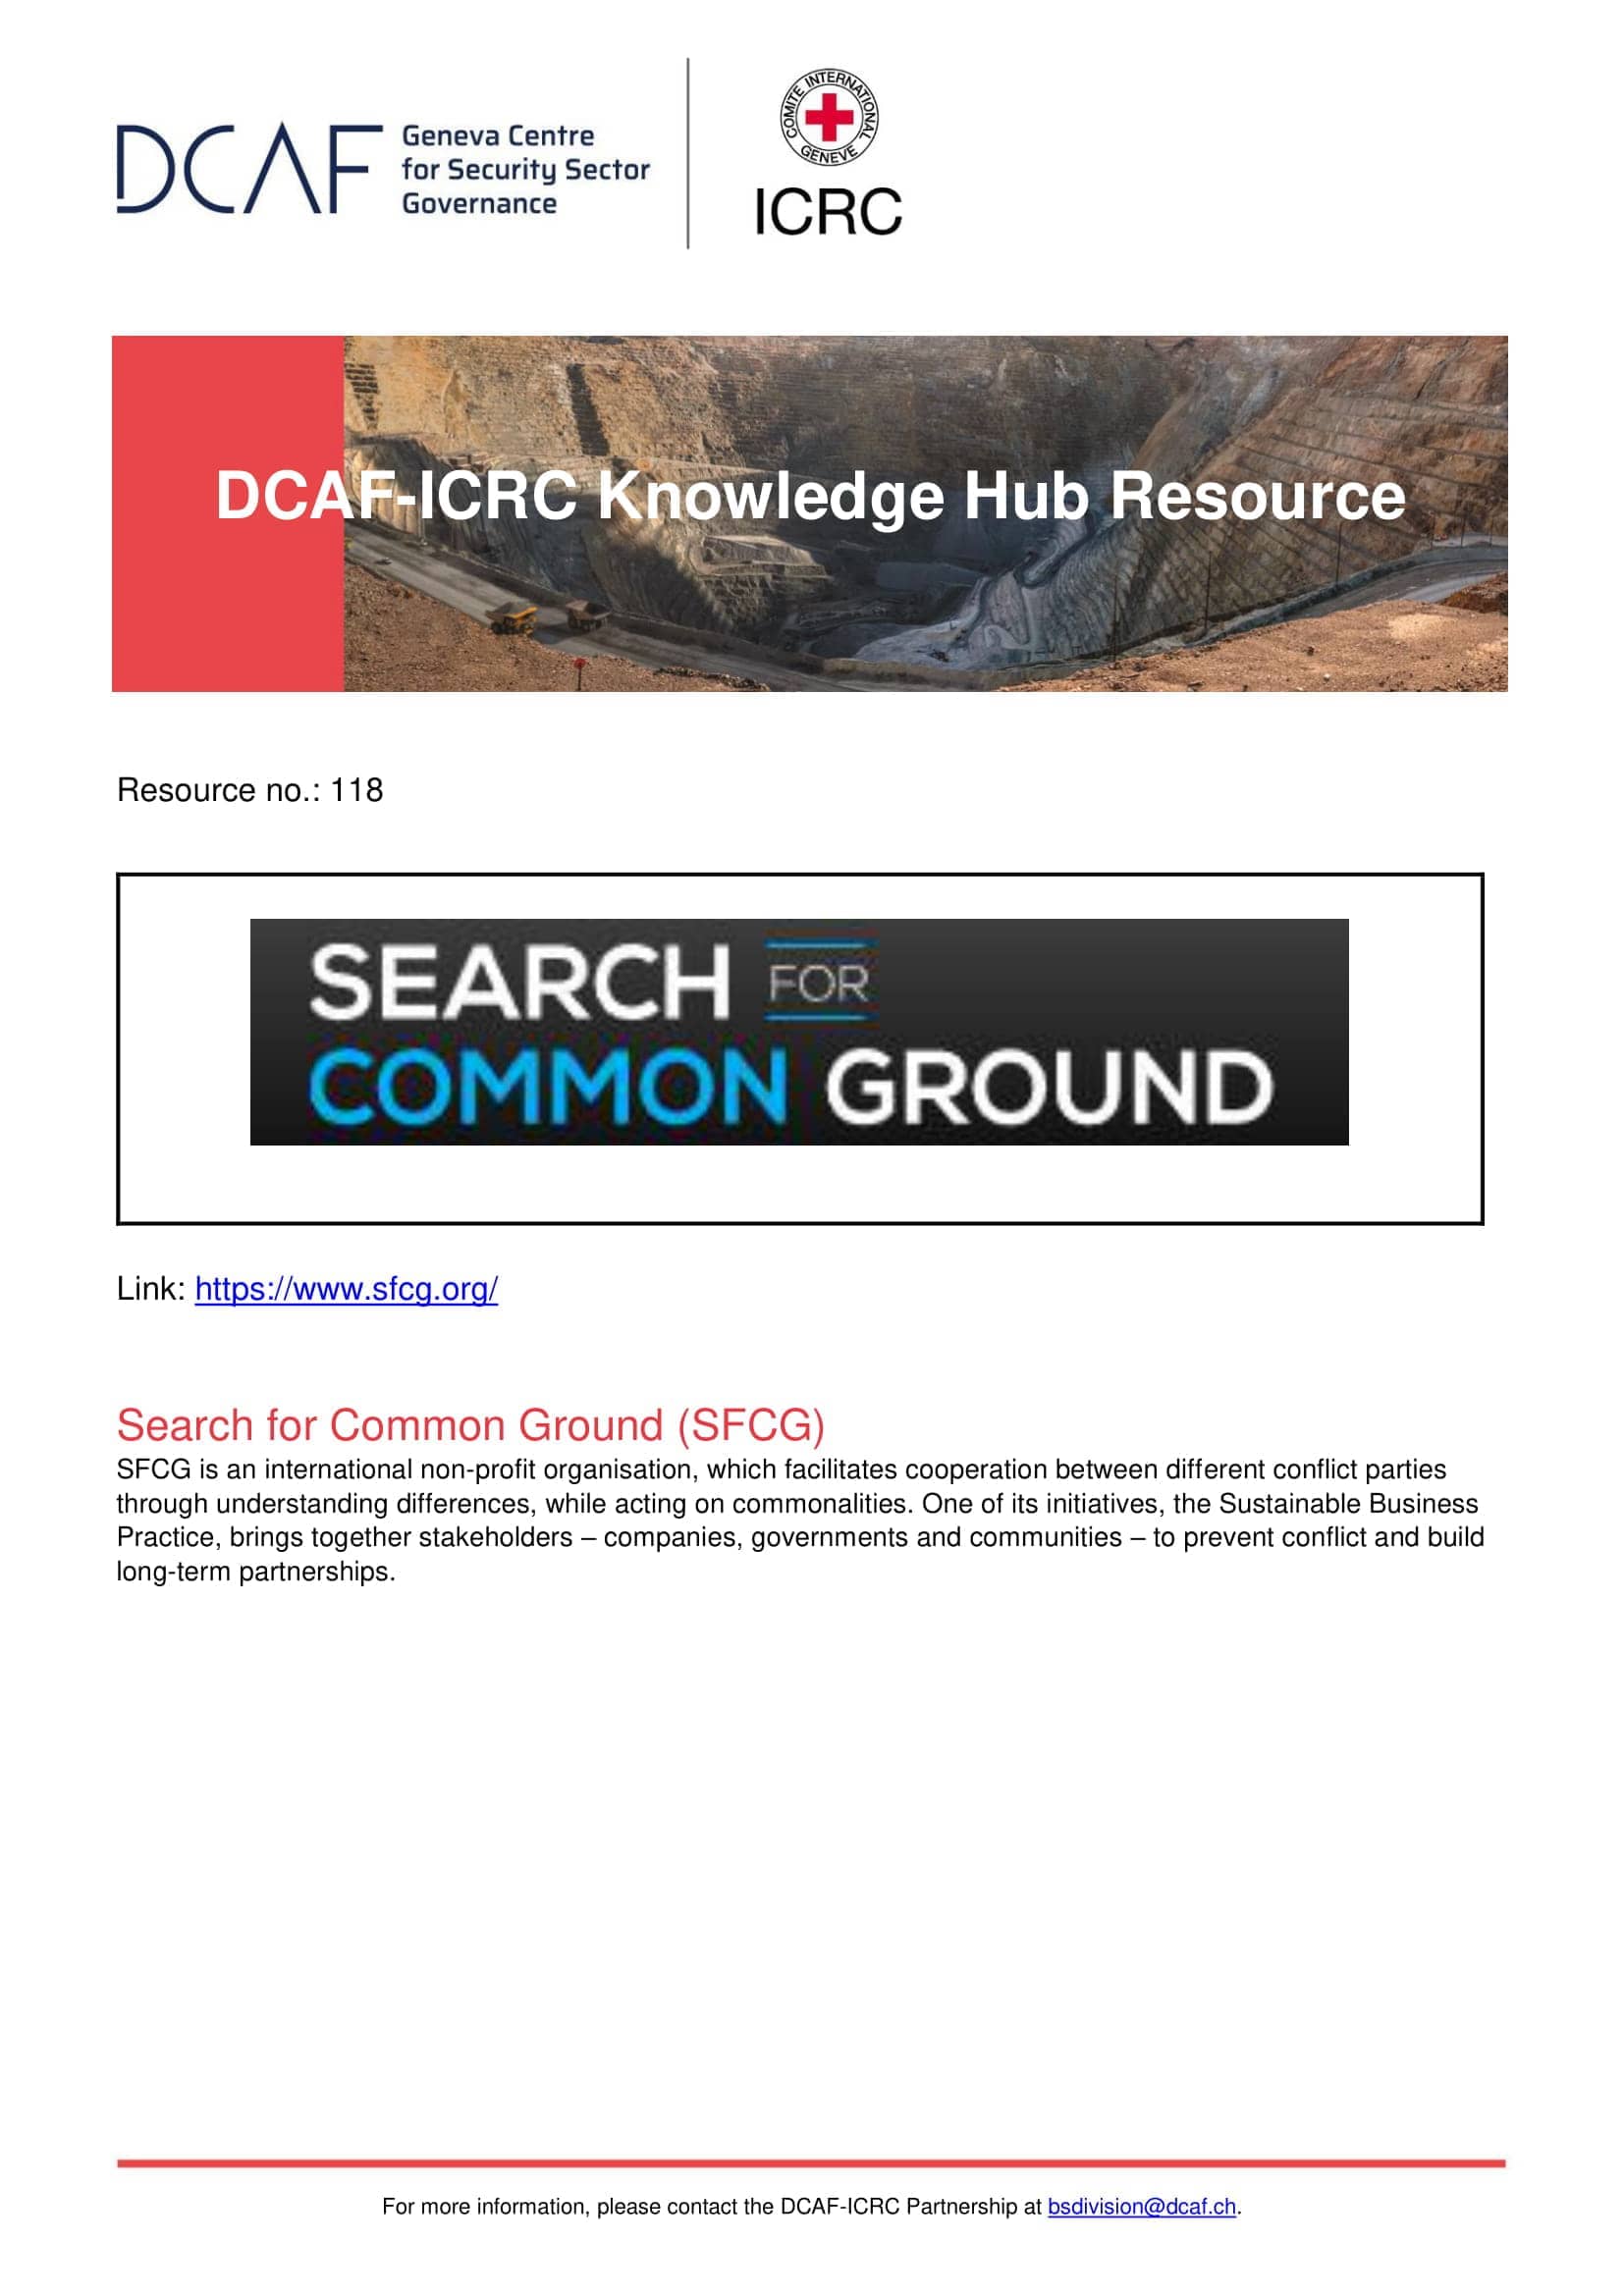 Search for Common Ground (SFCG)